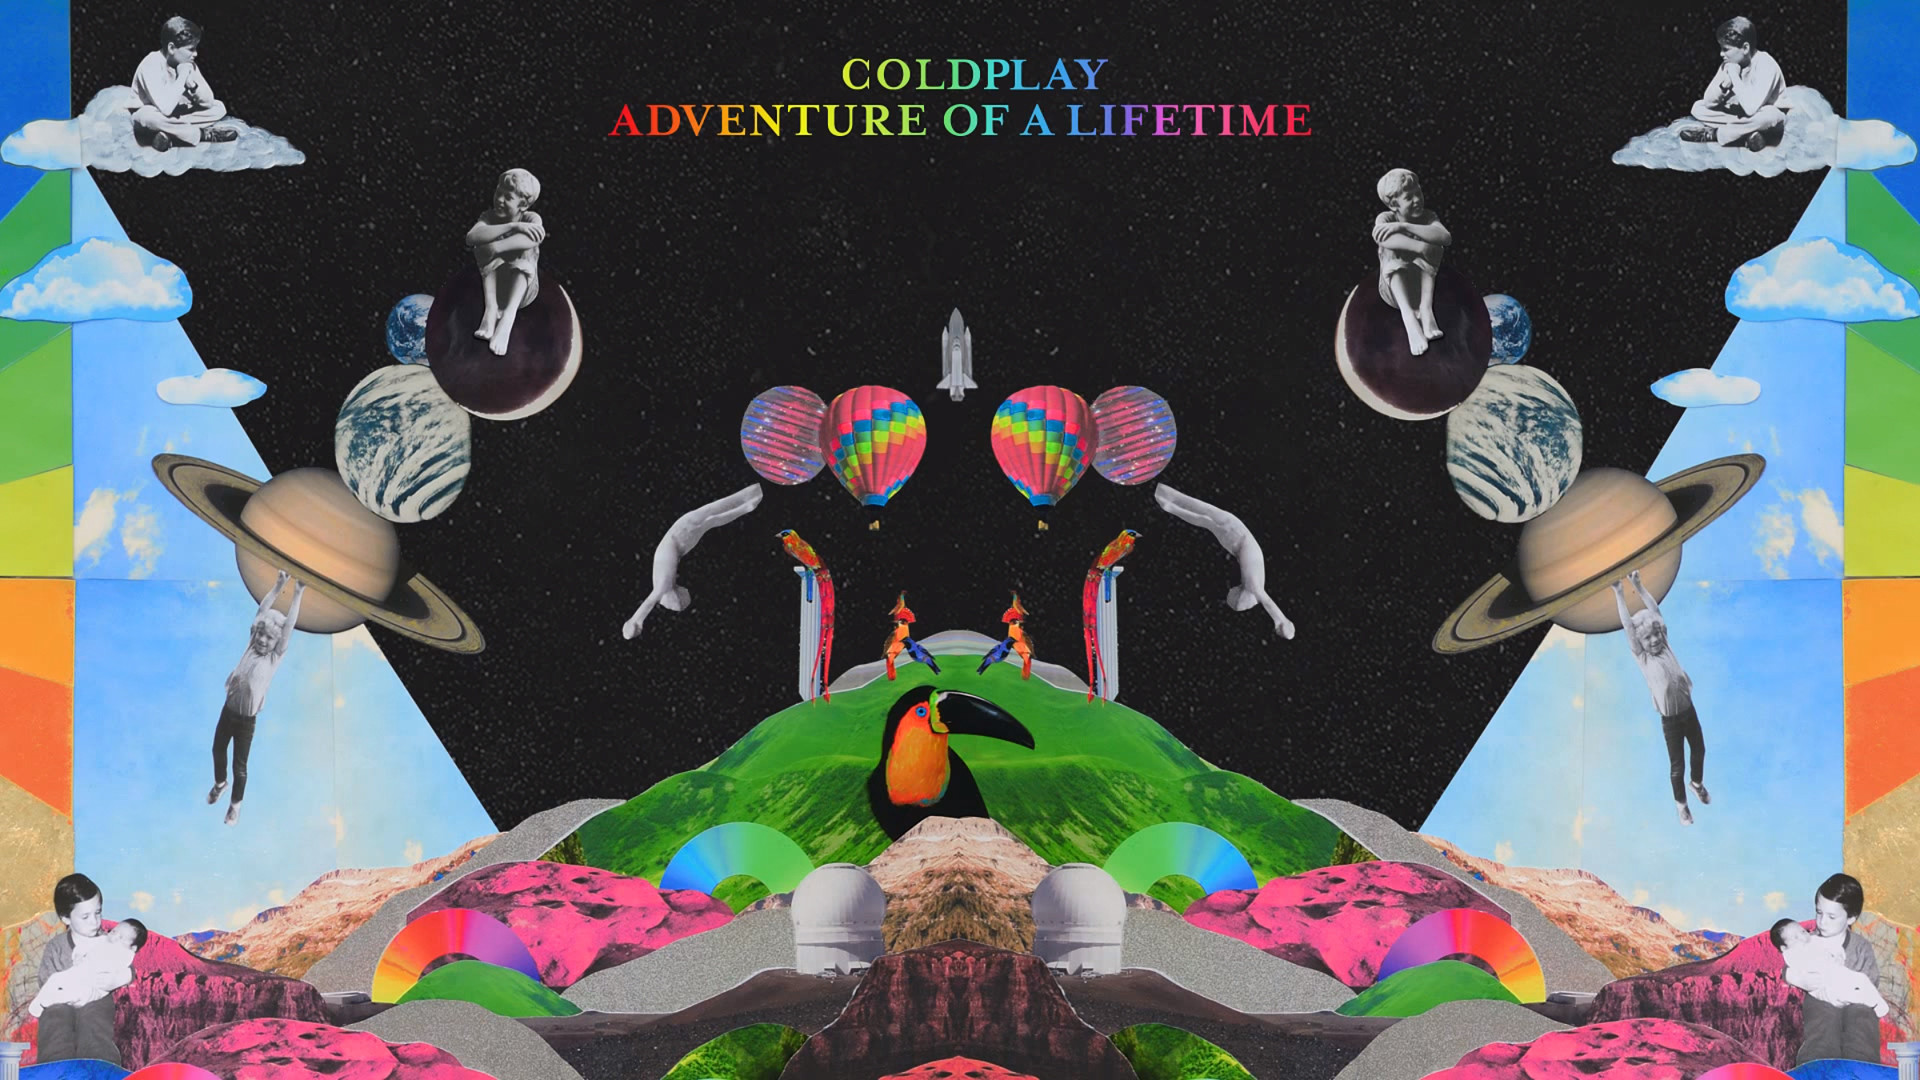 1920x1080 Coldplay - Wallpaper - Adventure Of A Lifetime